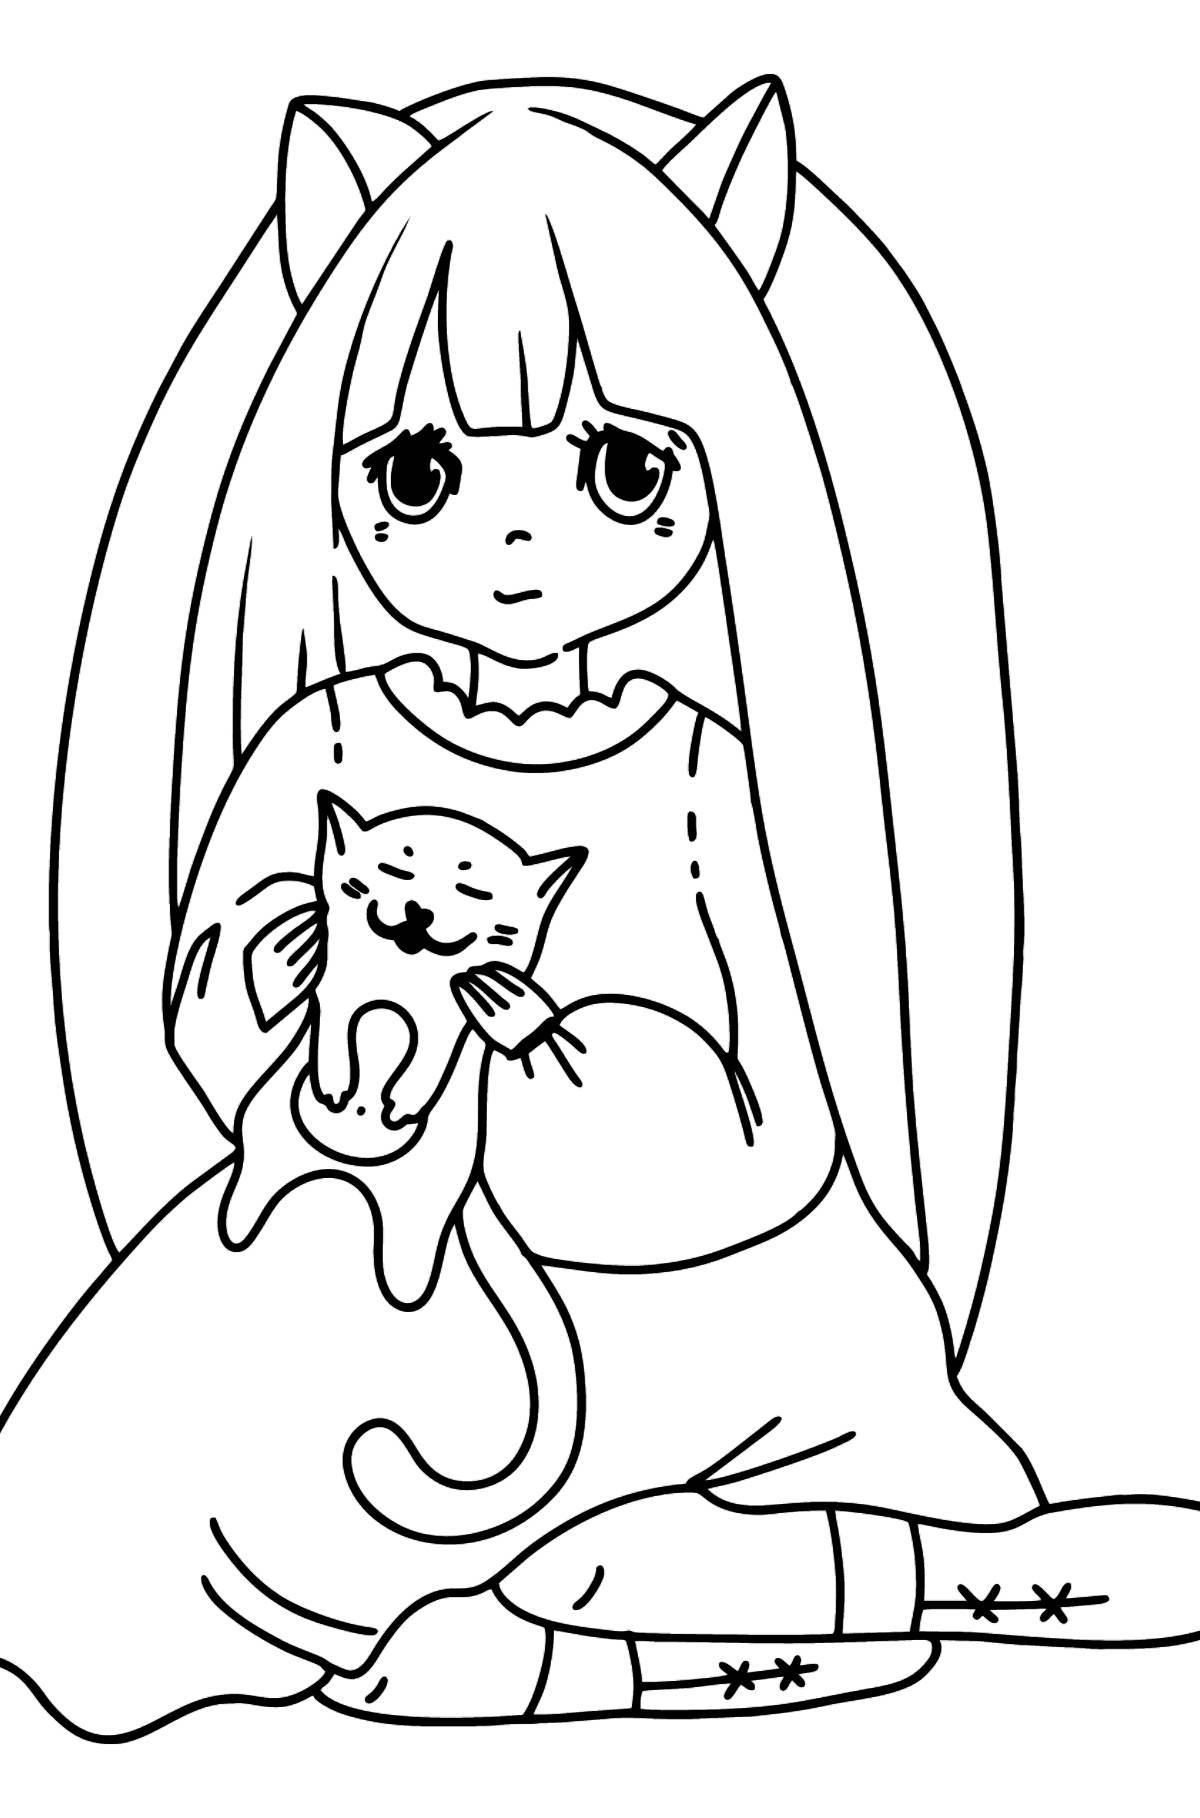 Colorful anime coloring book for kids